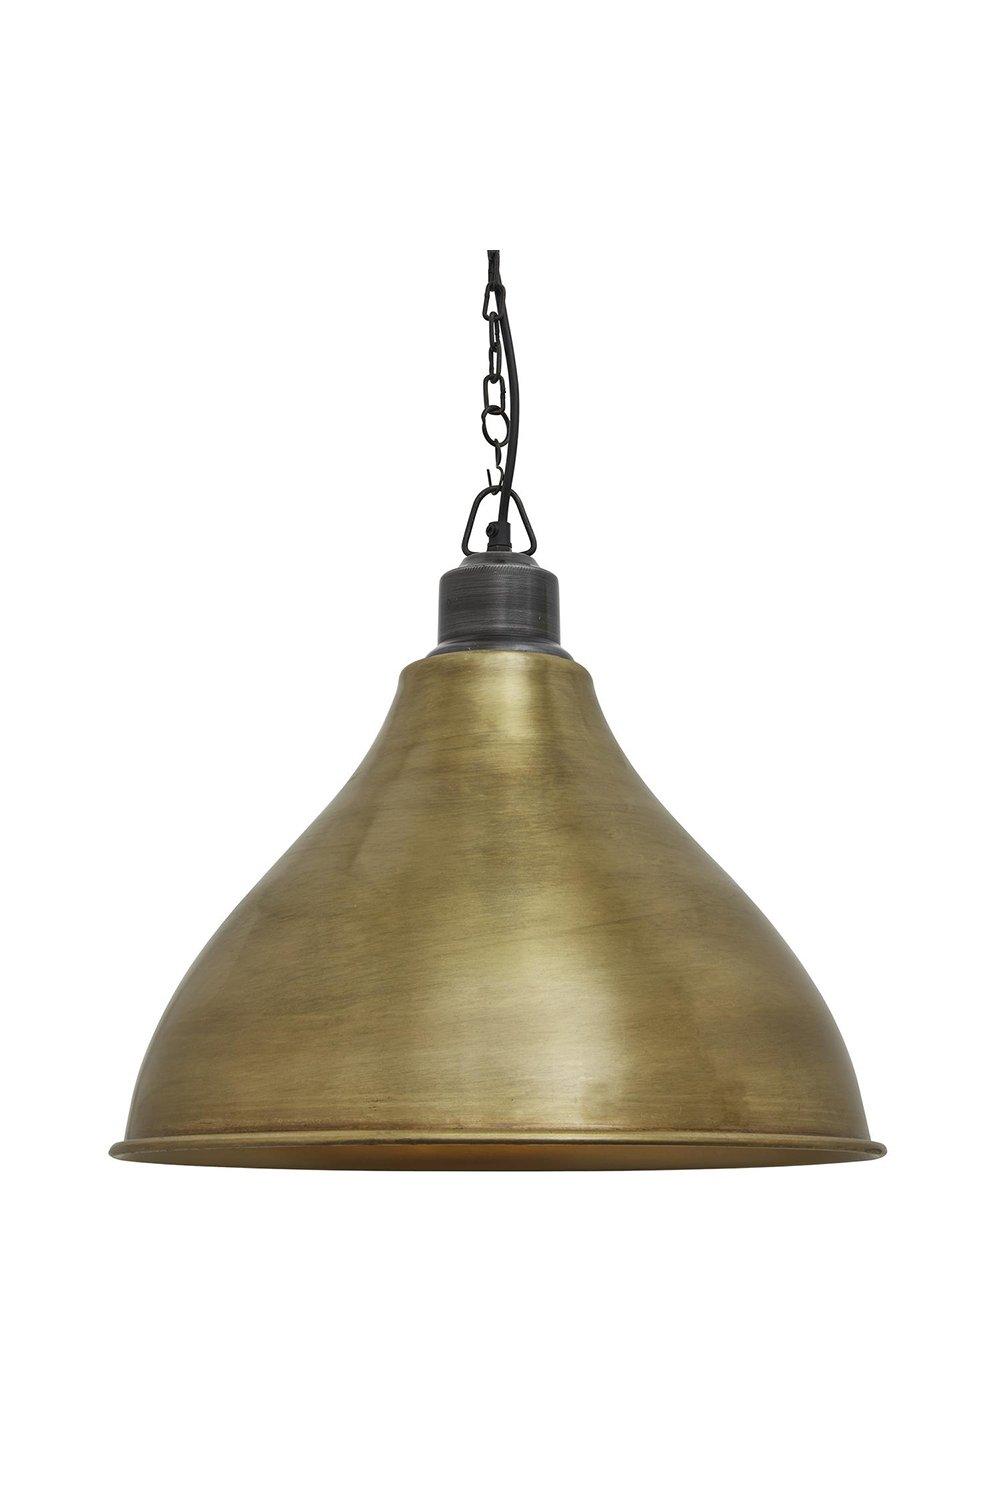 Brooklyn Cone Pendant, 12 Inch, Brass, Pewter Chain Holder